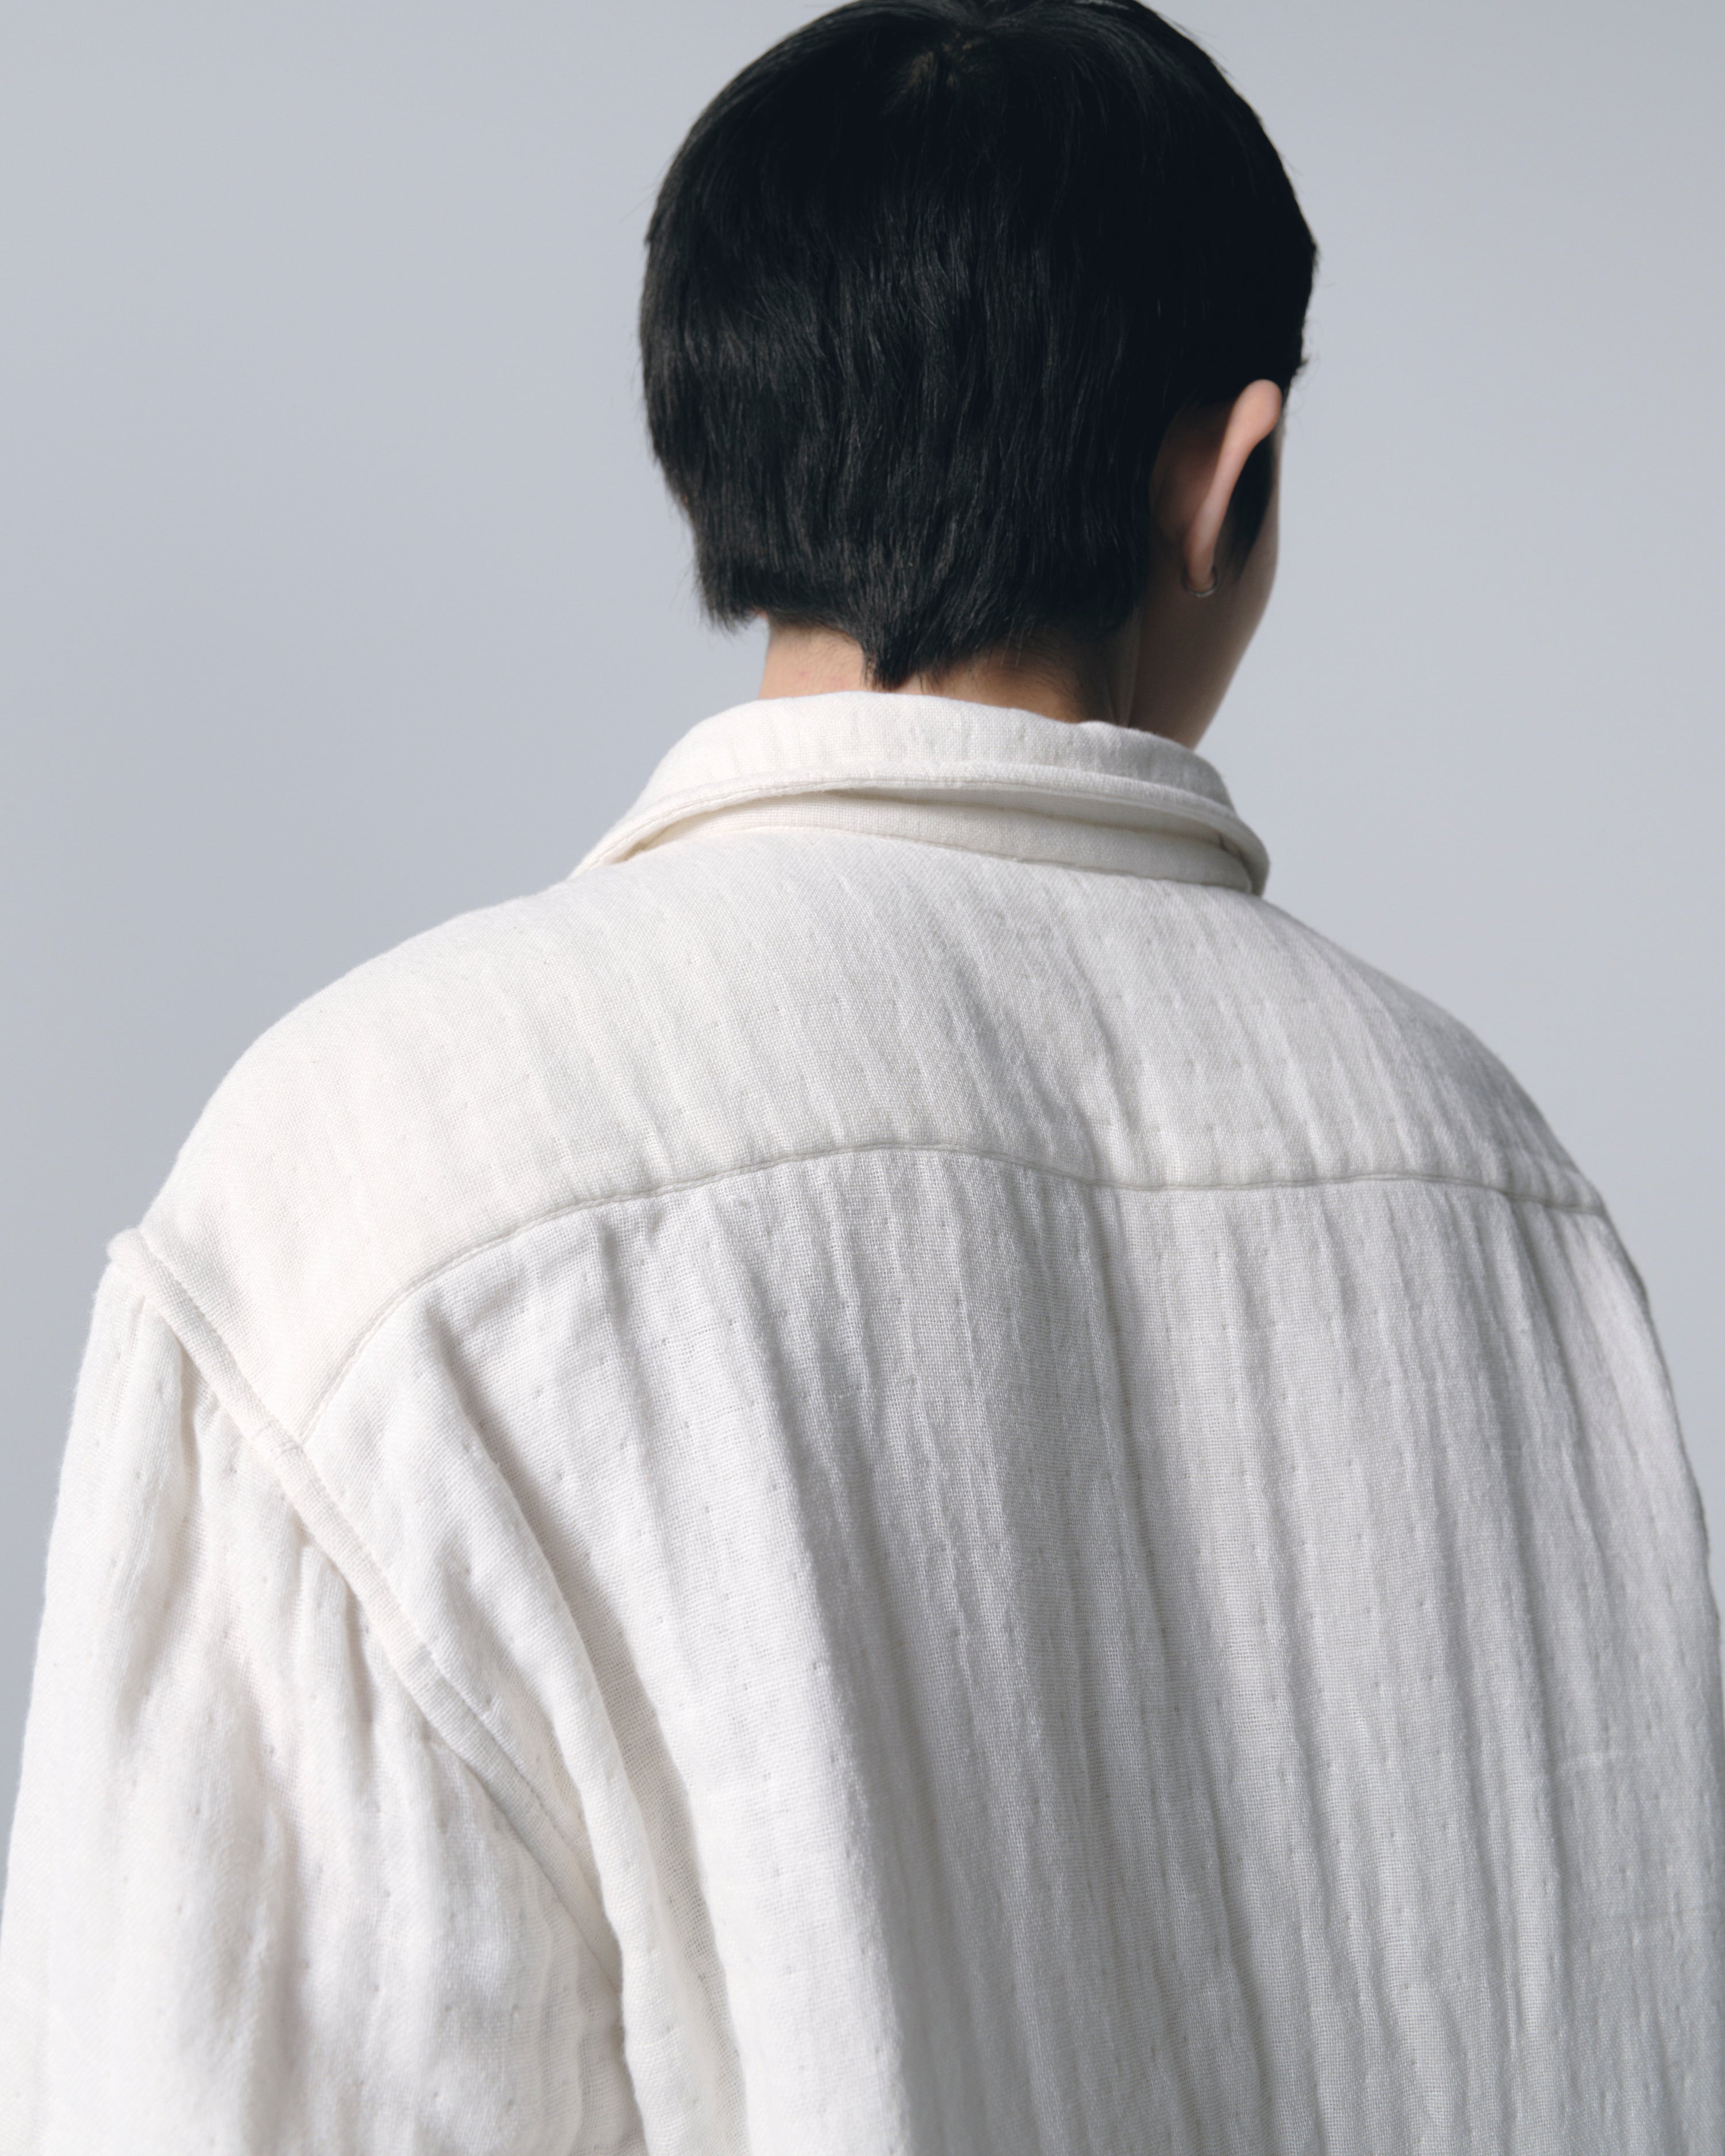 FIELD SHIRT - WHITE TRIPLE GAUZE COTTON WITH NATURALLY DYED HAND MENDING